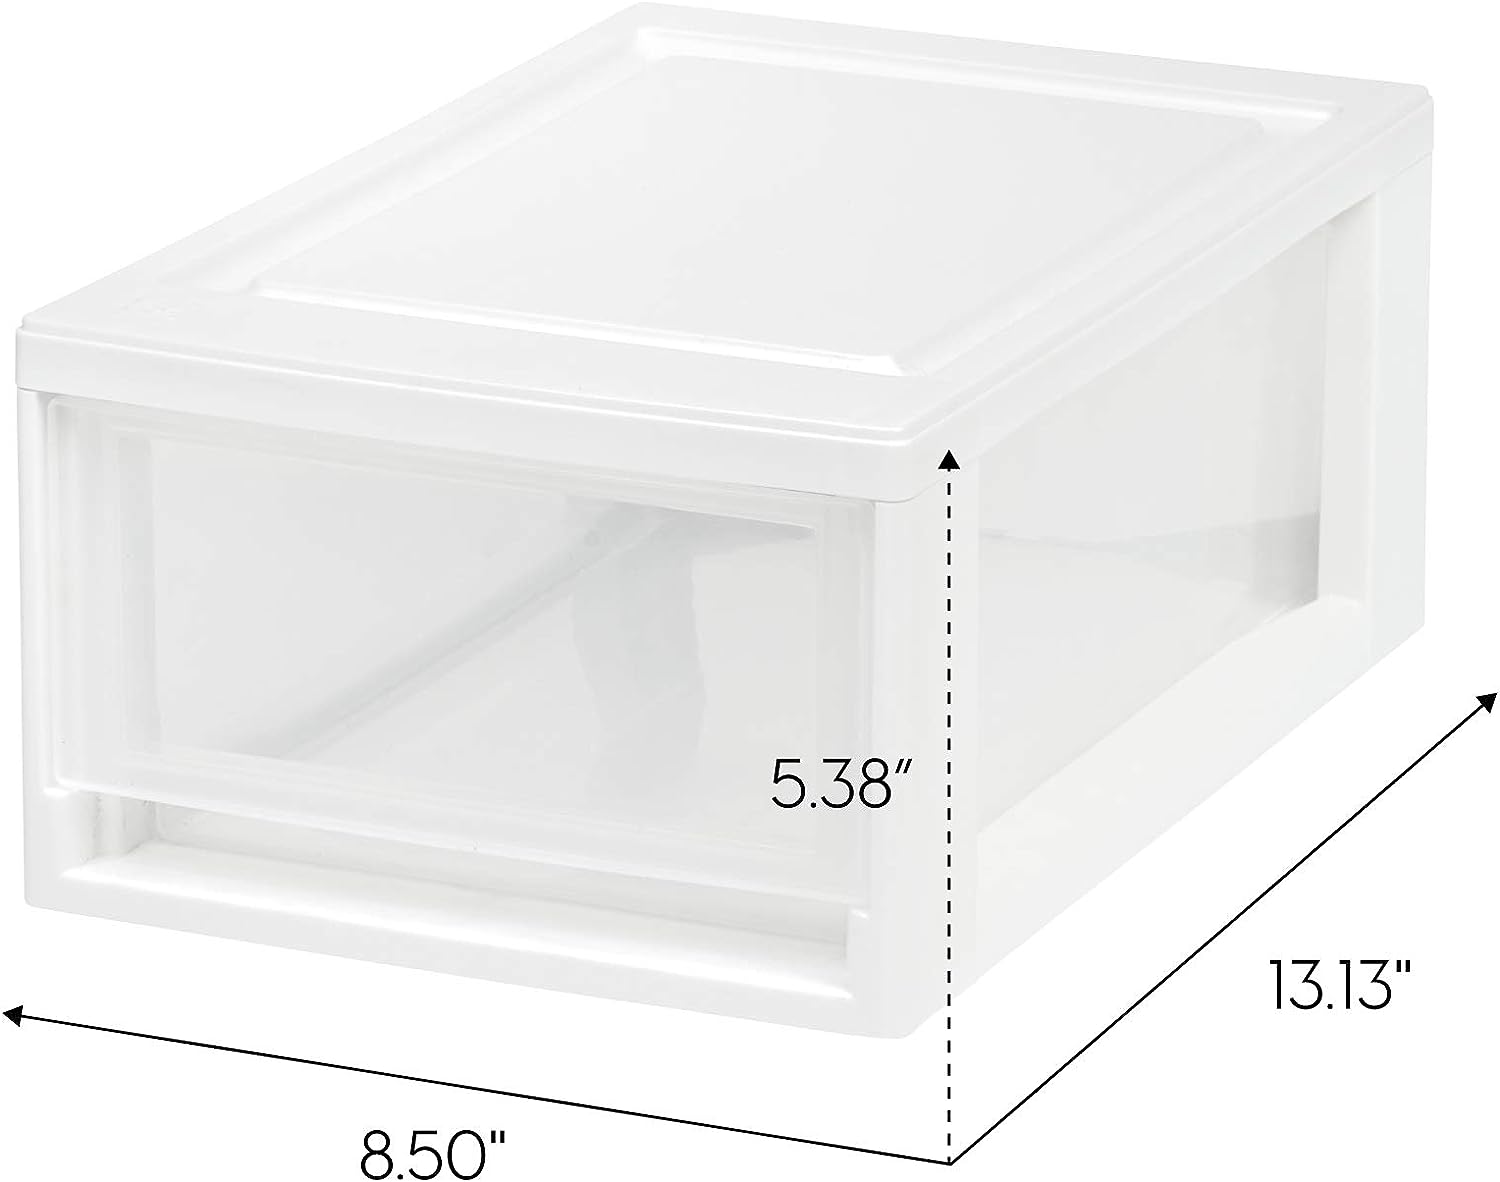 https://bigbigmart.com/wp-content/uploads/2023/08/IRIS-USA-6-Quart-Stackable-Storage-Drawer-Plastic-Drawer-Organizer-with-Clear-Doors-for-Pantry-Closet-Desk-Kitchen-Under-Sink-Home-and-Office-De-Clutter-Shoes-and-Crafts-White-8-Pack6.jpg